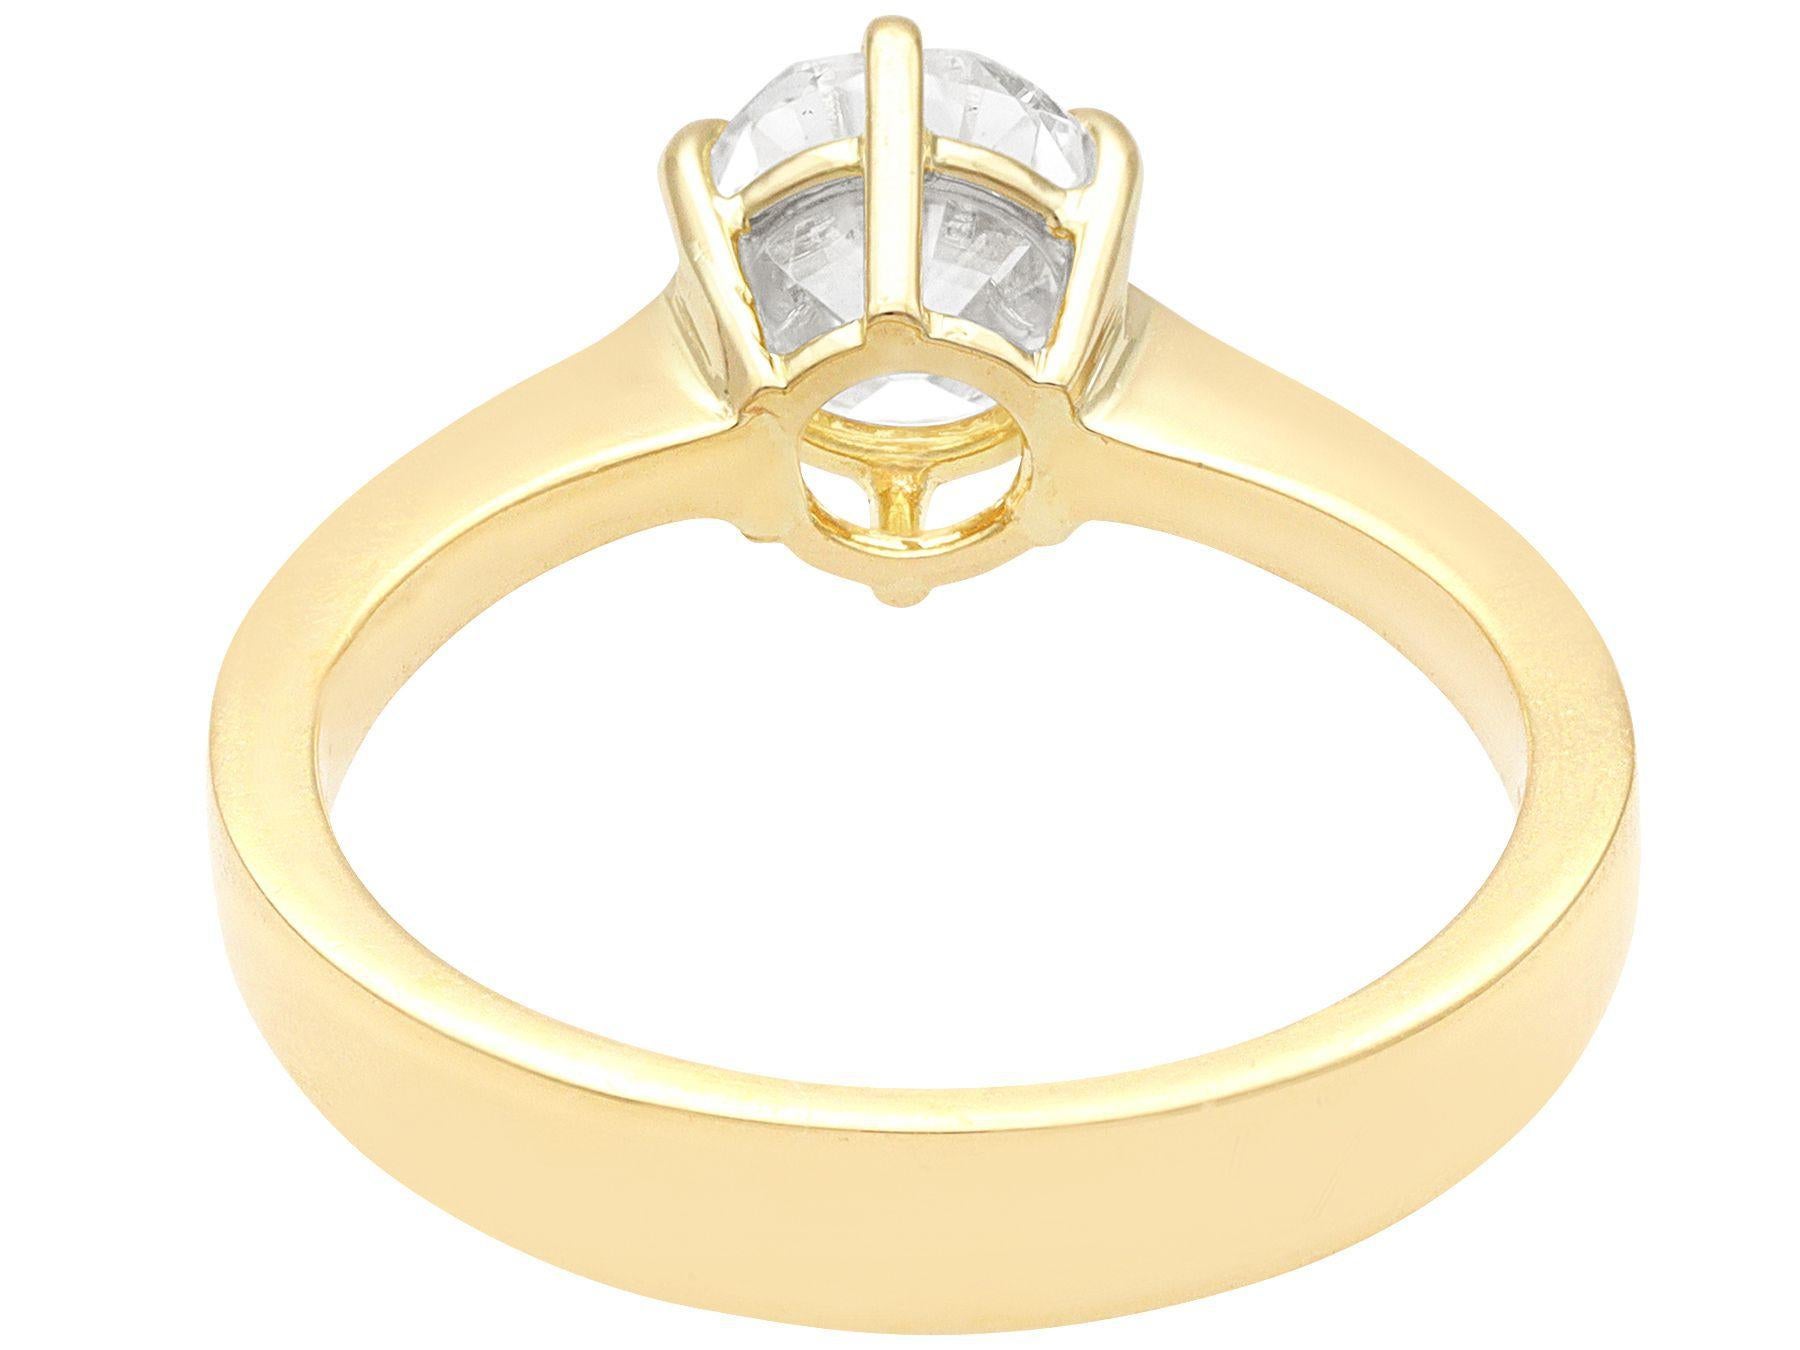 1.38 Carat Diamond 18k Yellow Gold Solitaire Engagement Ring In Excellent Condition For Sale In Jesmond, Newcastle Upon Tyne